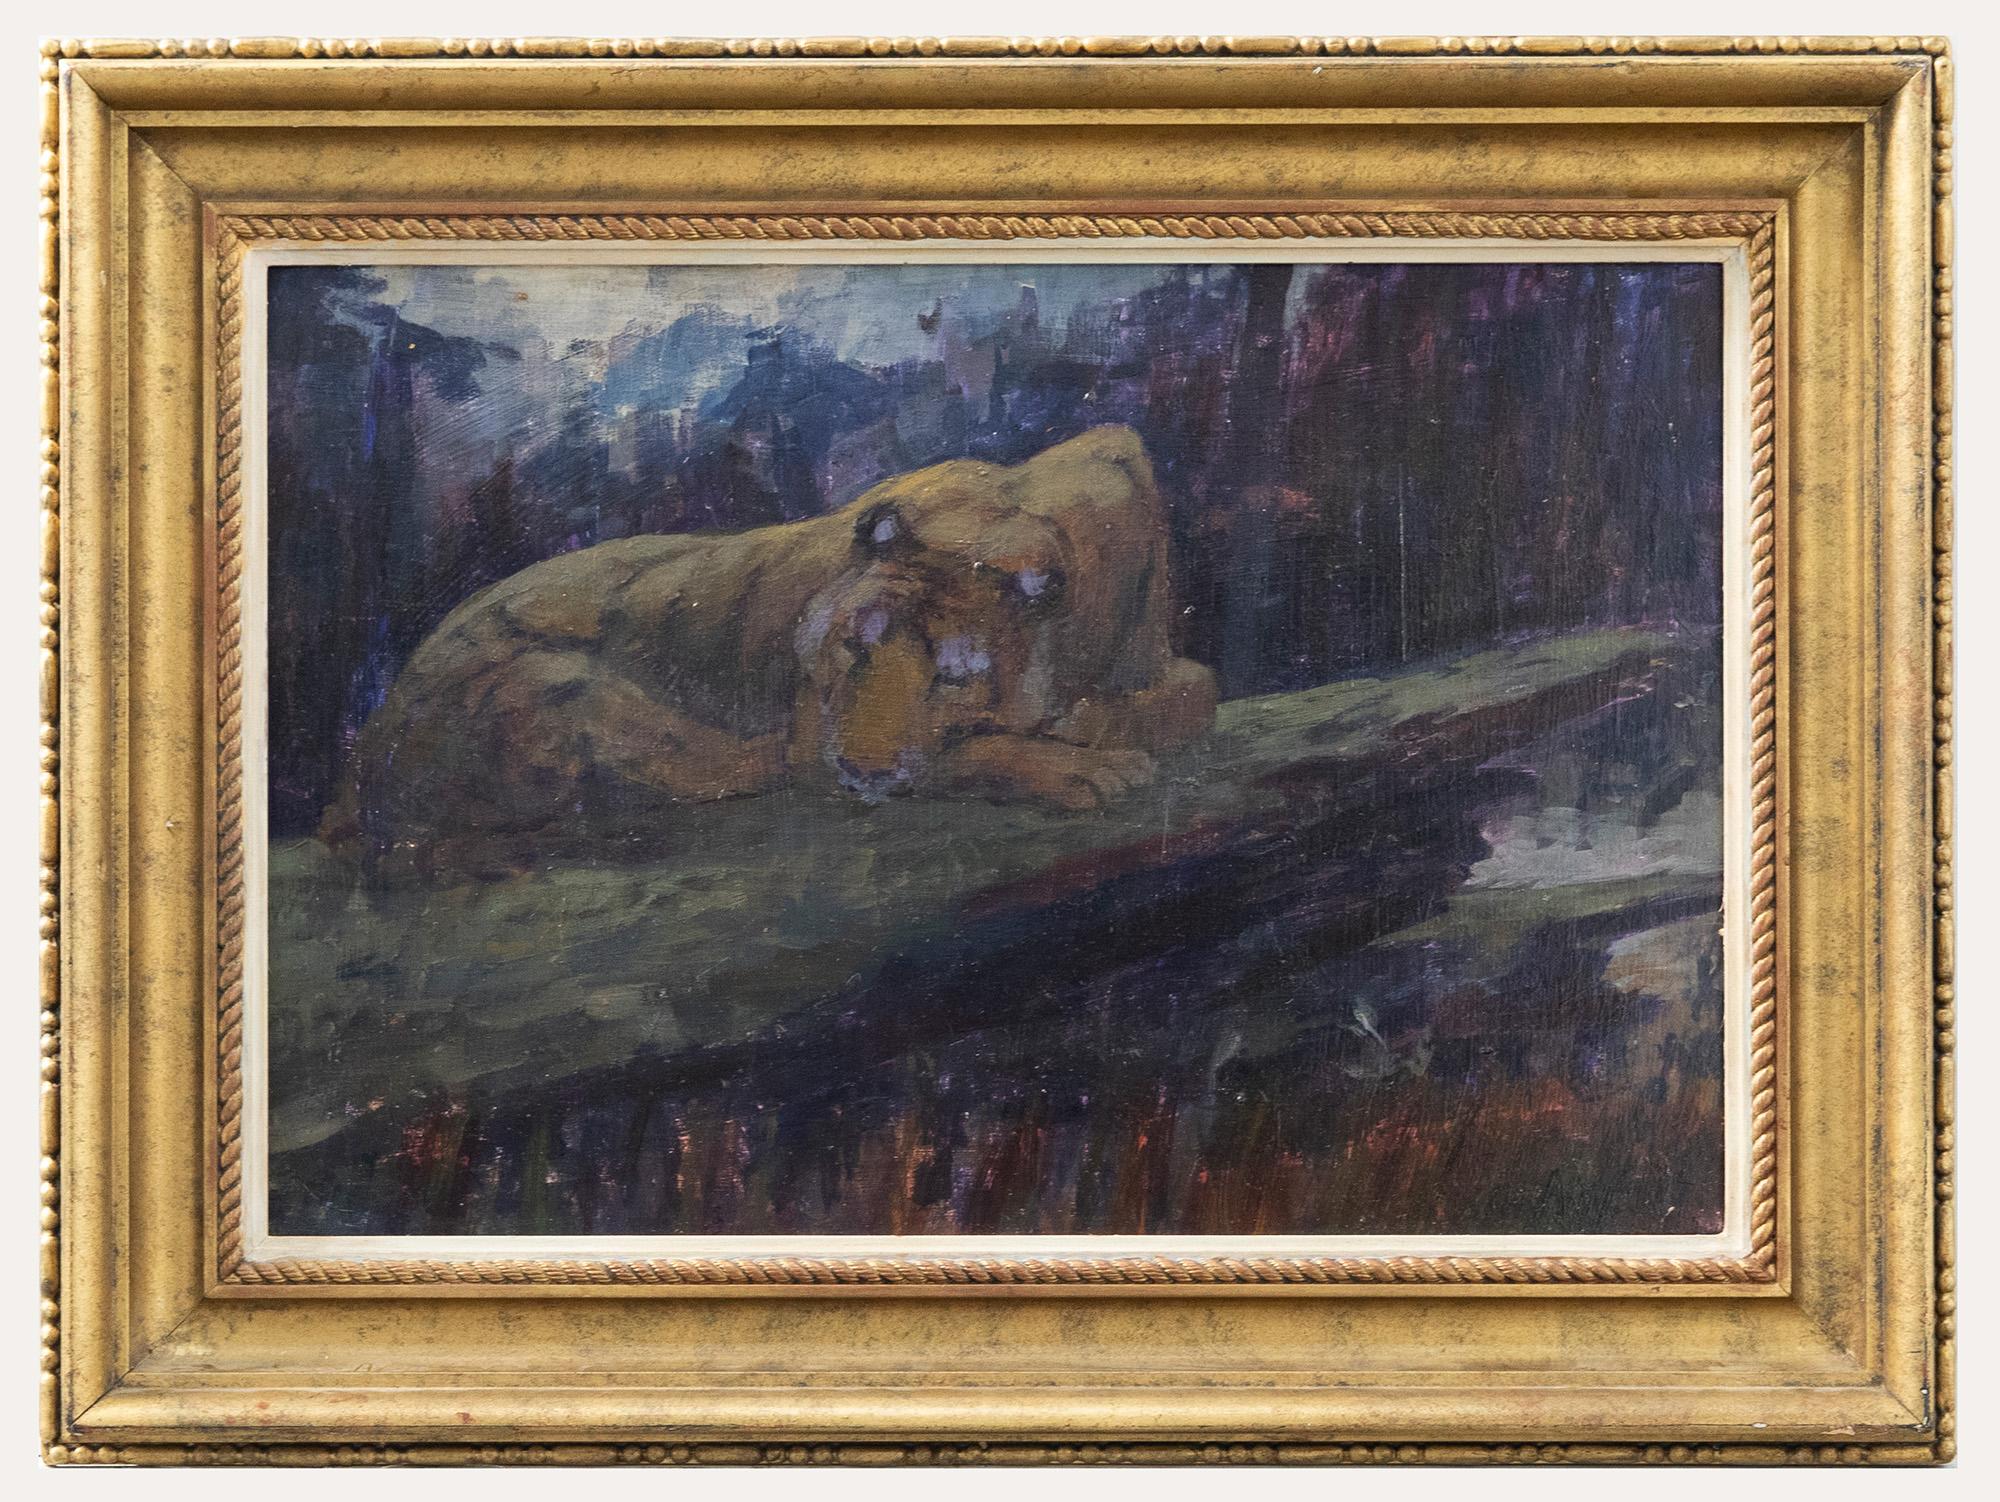 Unknown Animal Painting - 20th Century Oil - Recumbent Tiger